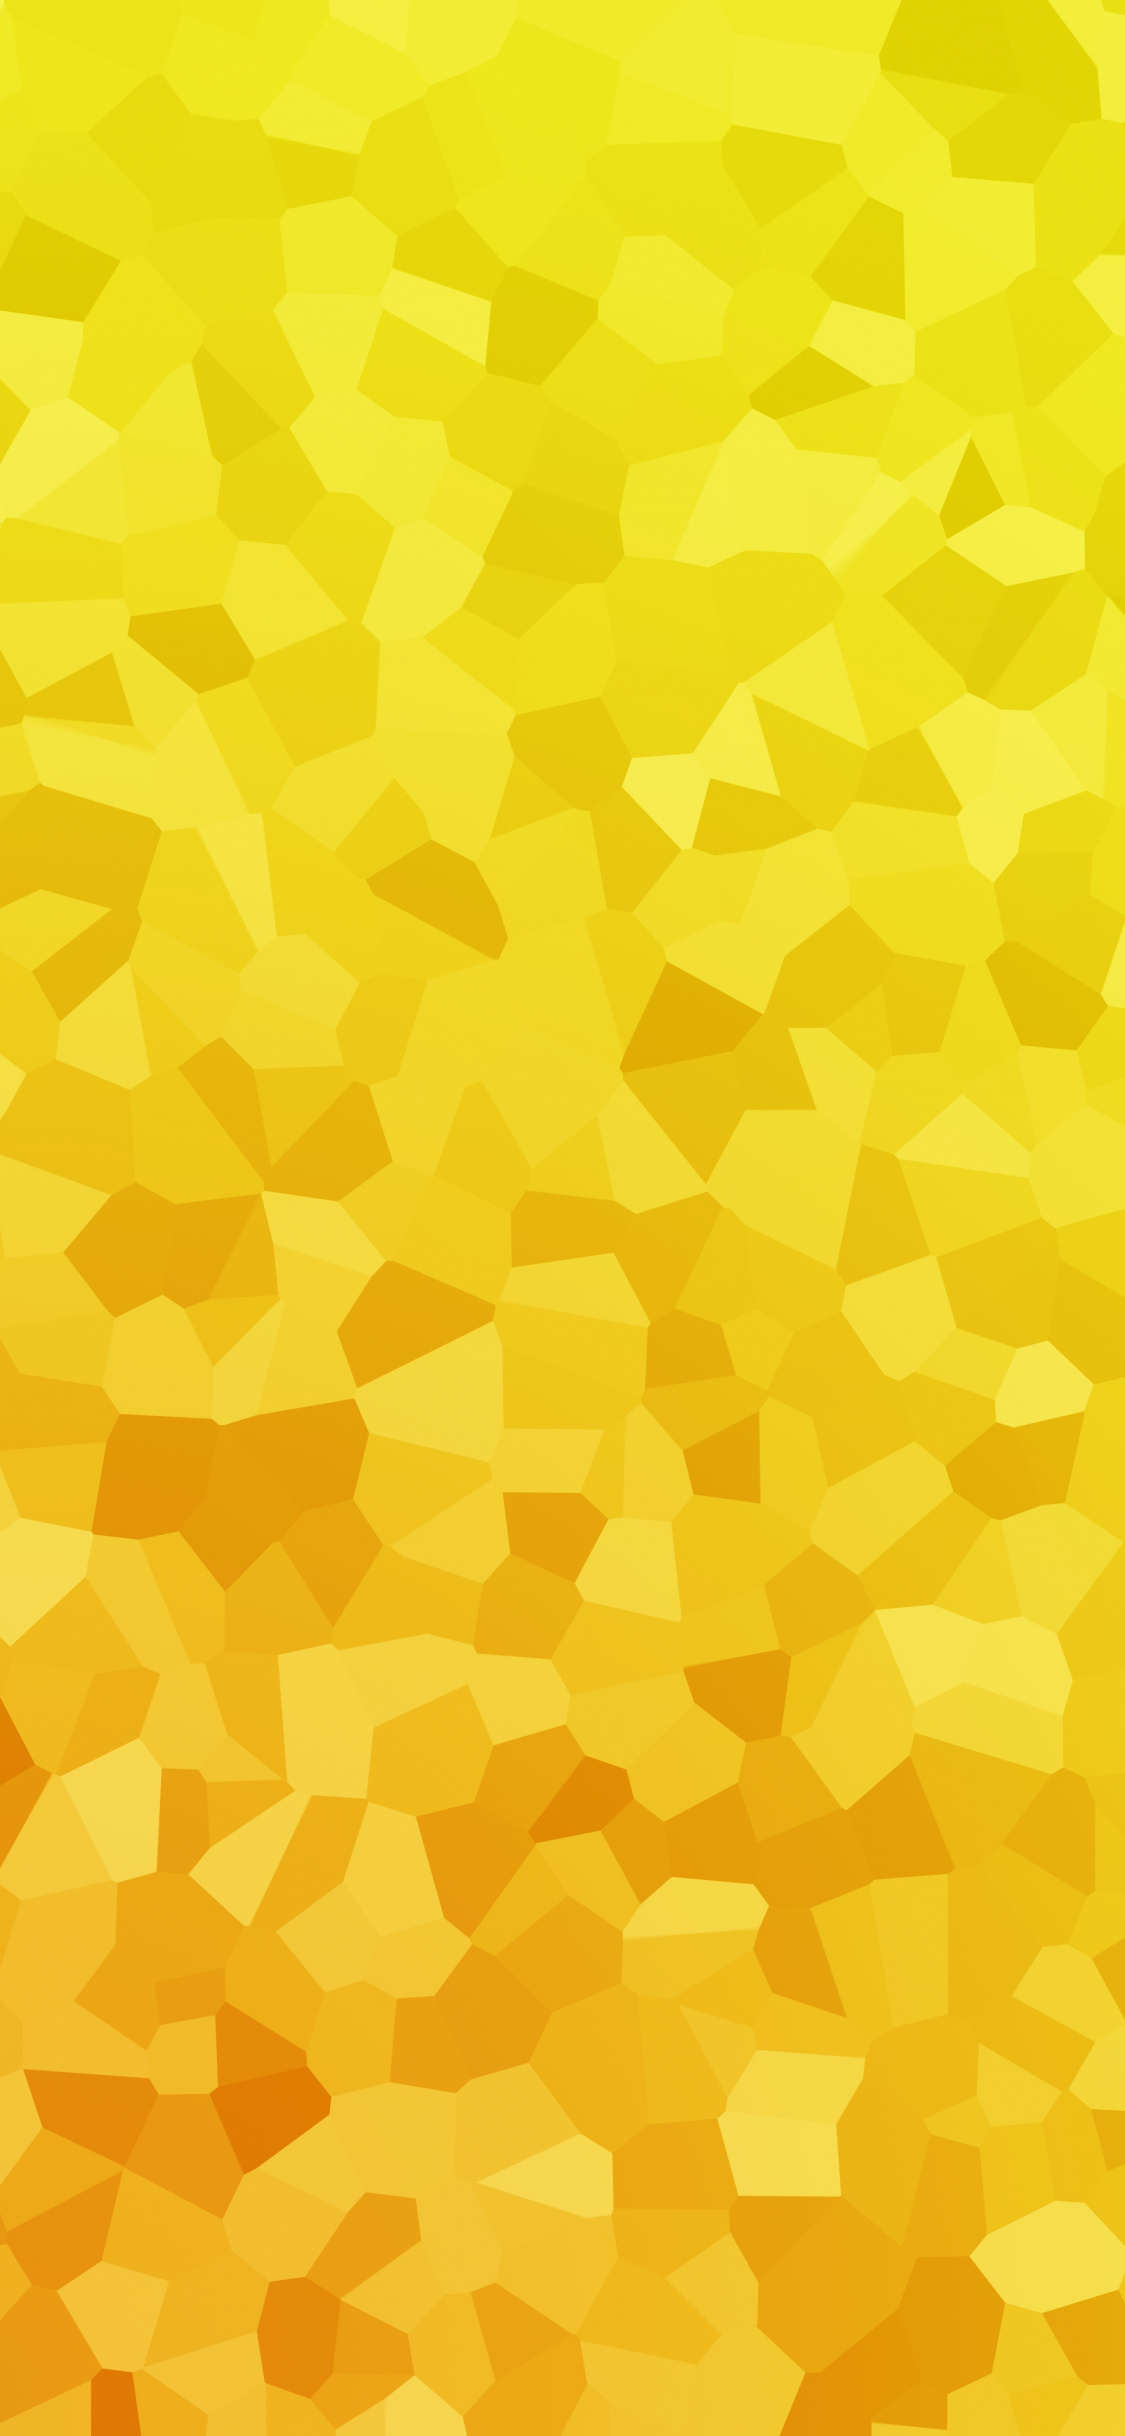 Yellow pieces abstract geometric wallpaper 2160x4096 hd image 1125x2436